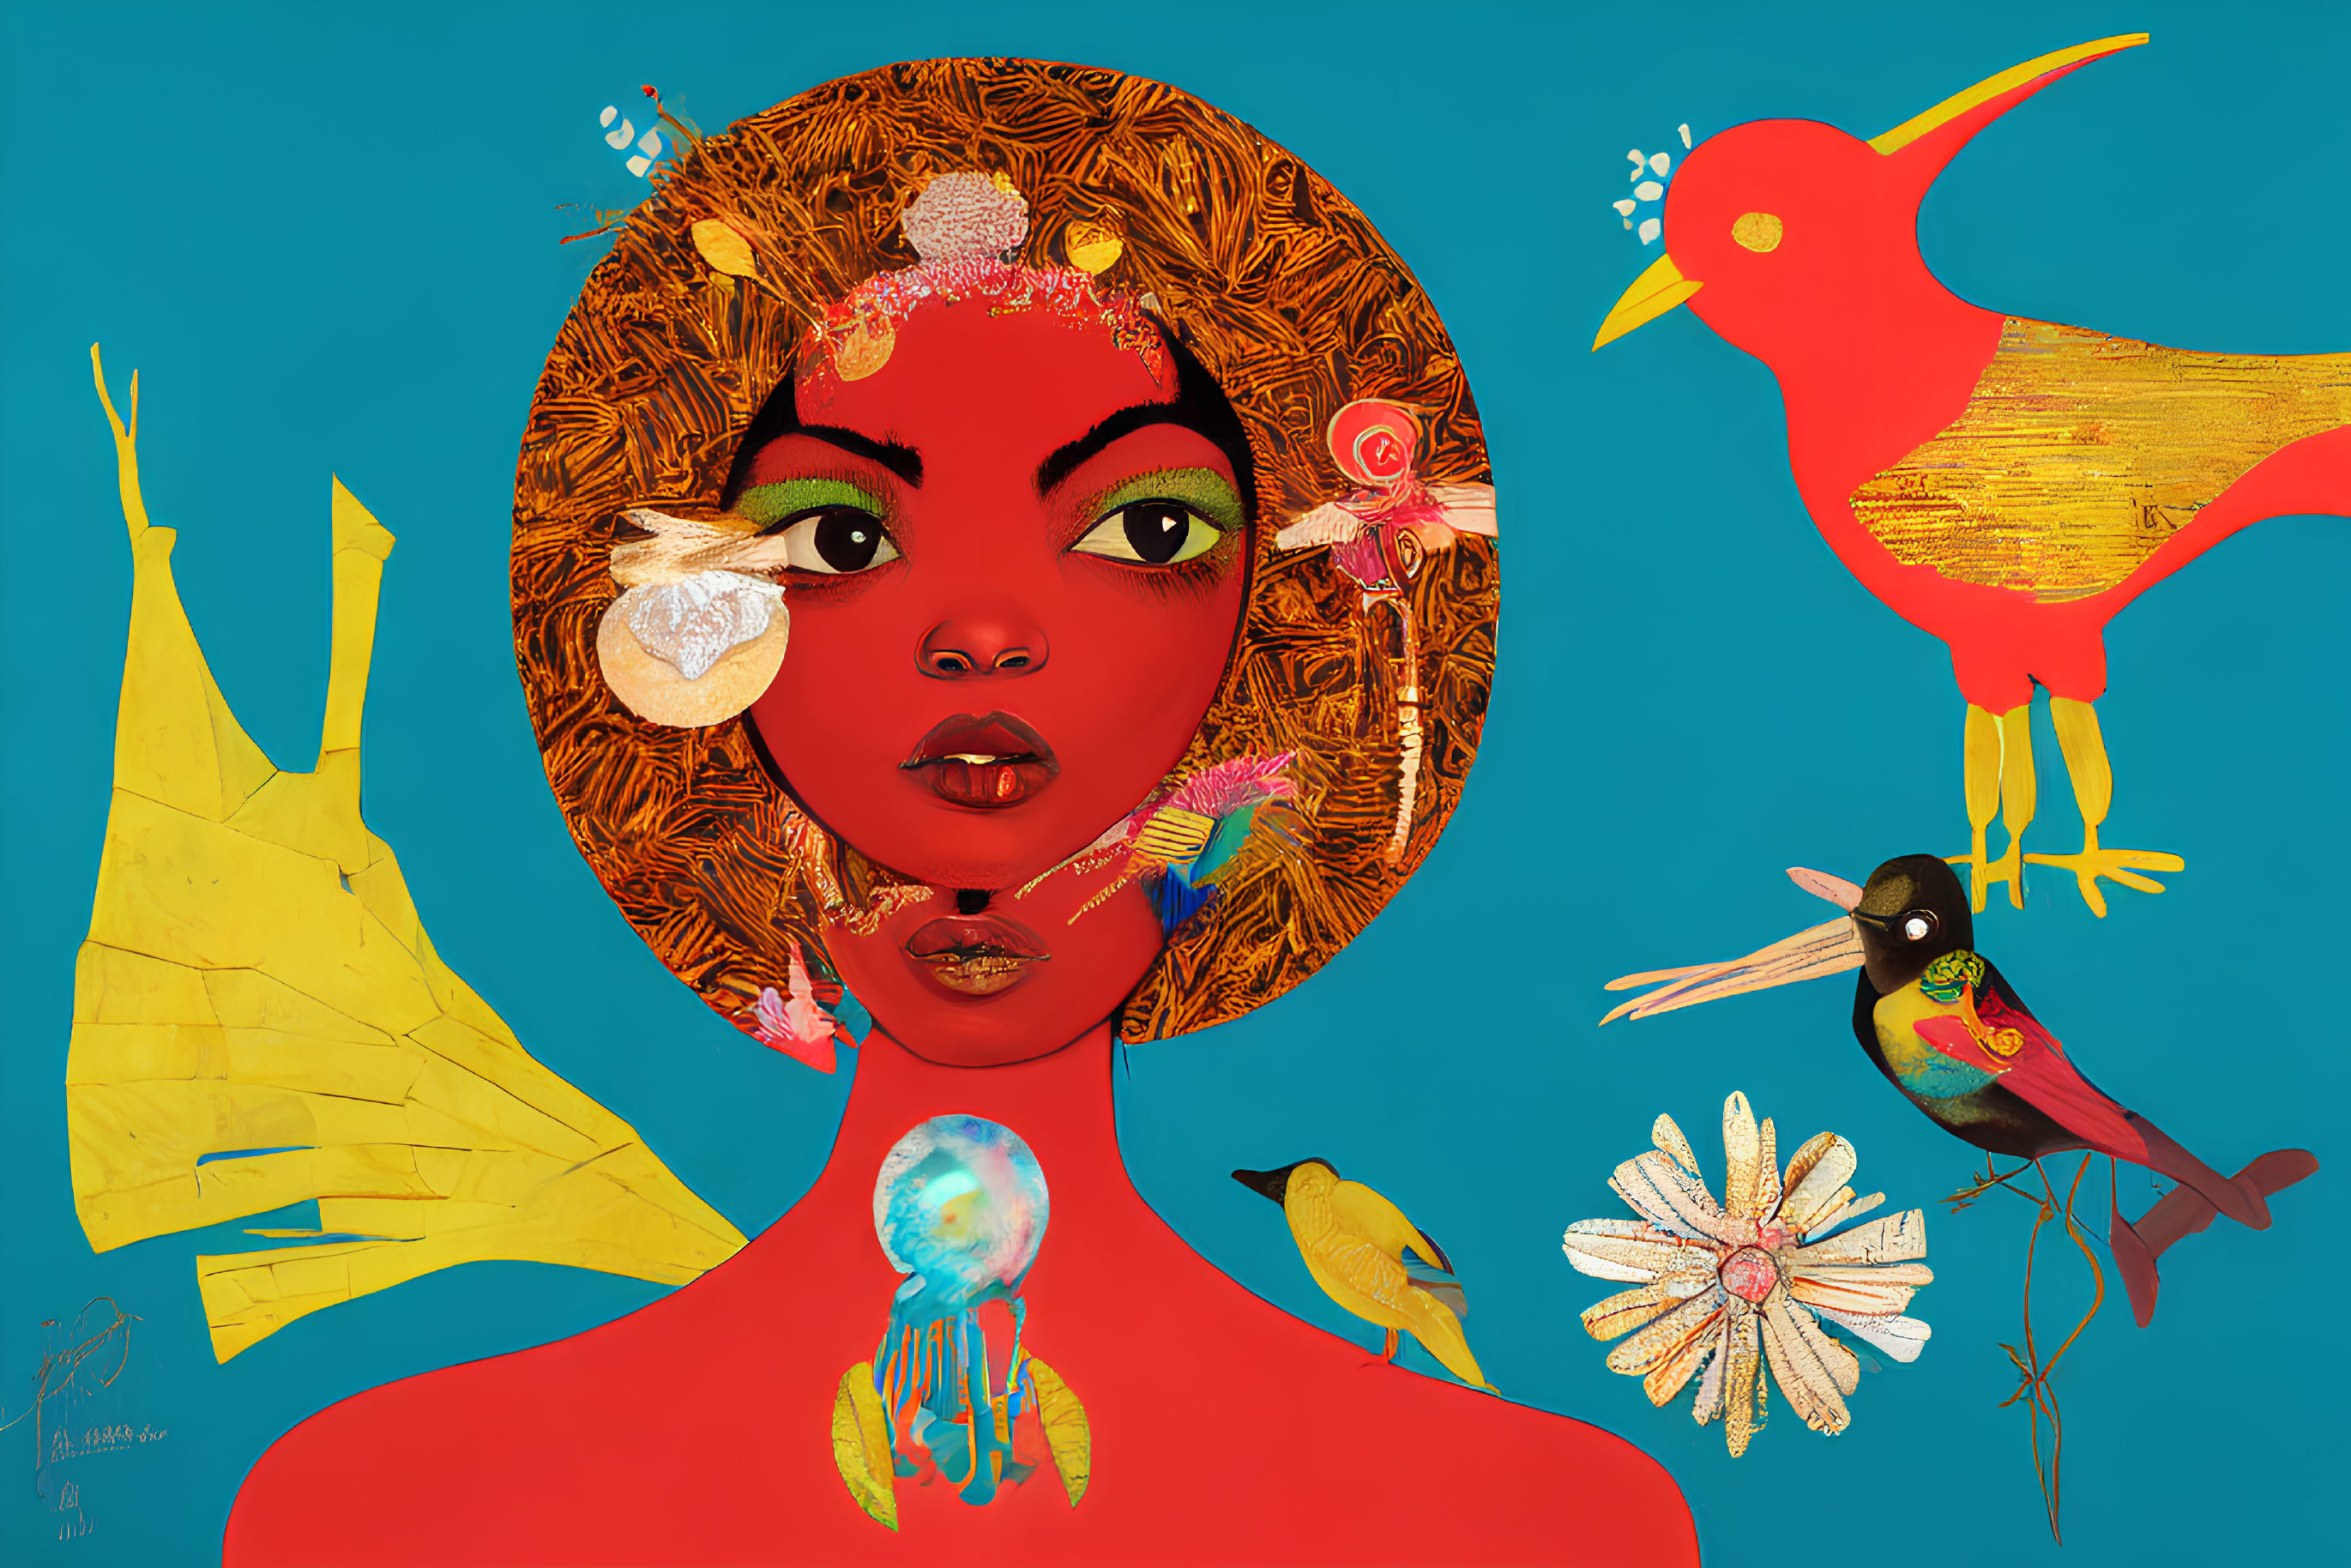 Vibrant woman with red hair and floral crown, surrounded by birds and sea creatures on blue background